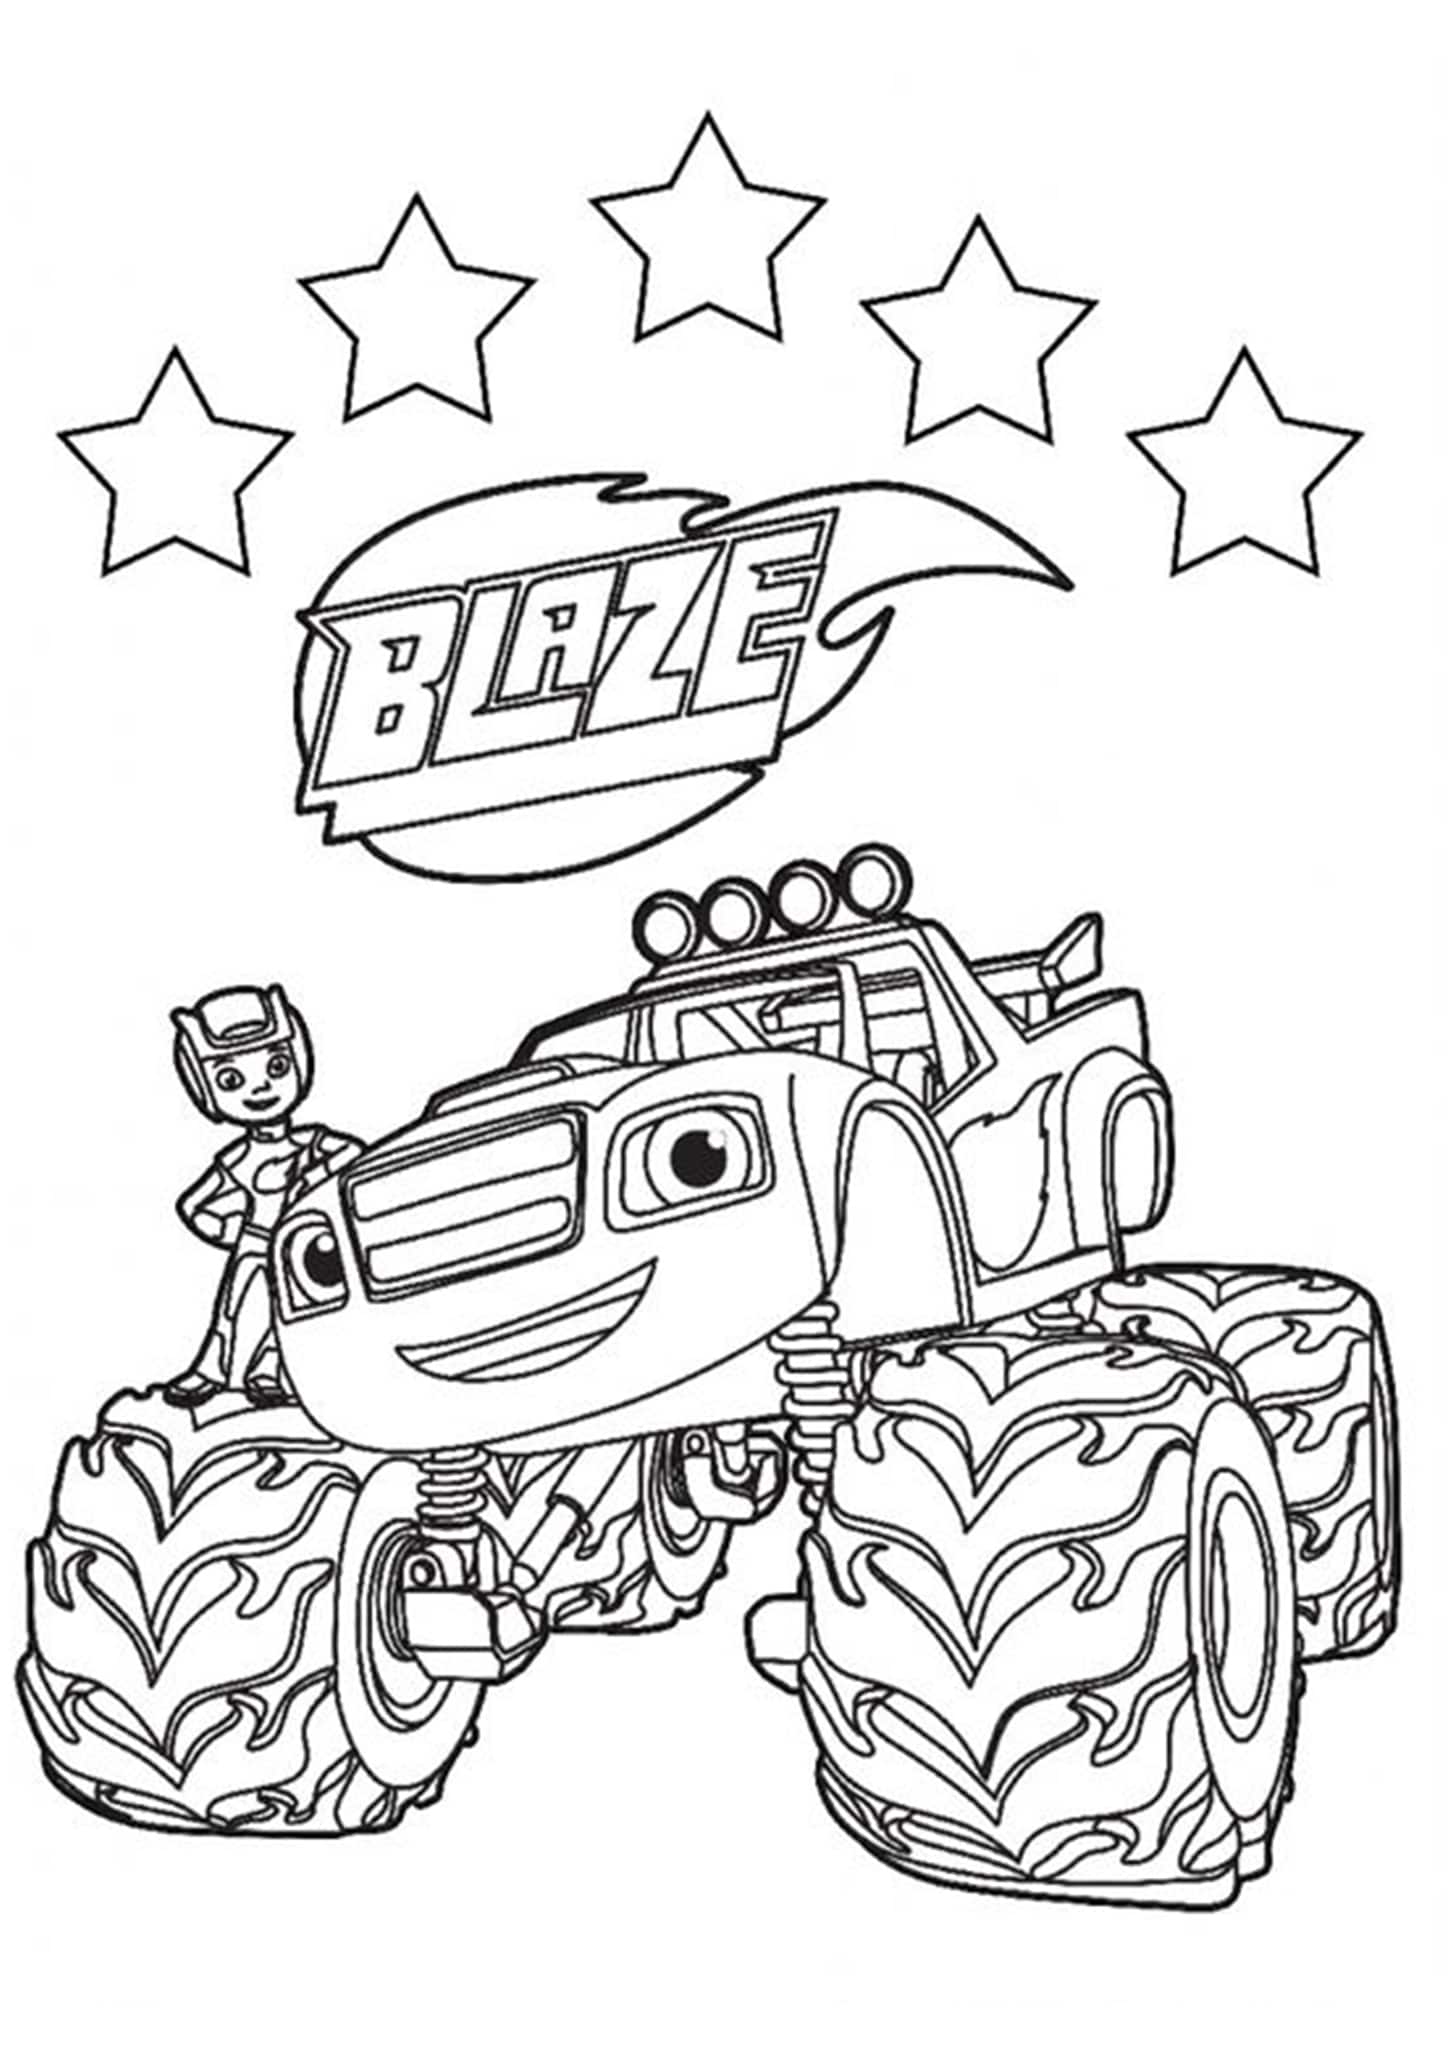 monster-truck-blaze-coloring-page-download-print-or-color-online-for